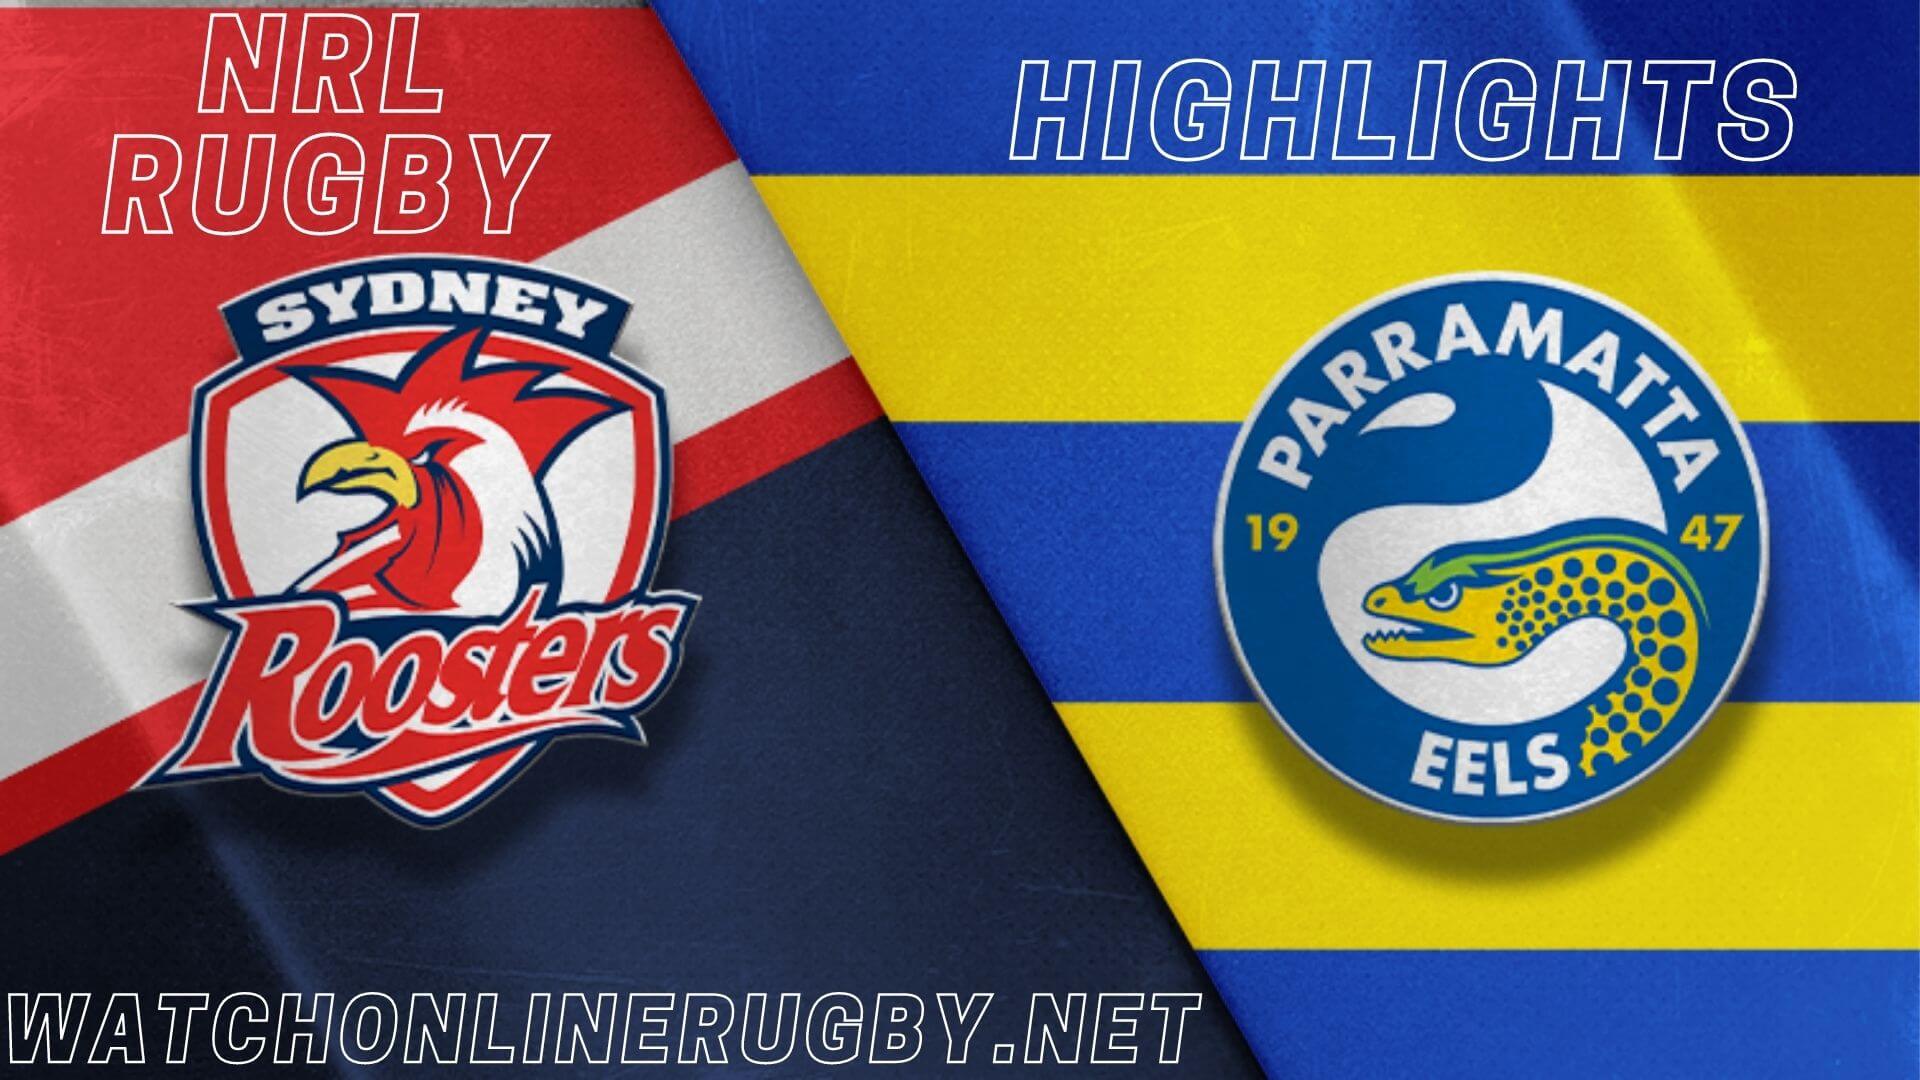 Eels Vs Roosters Highlights RD 15 NRL Rugby